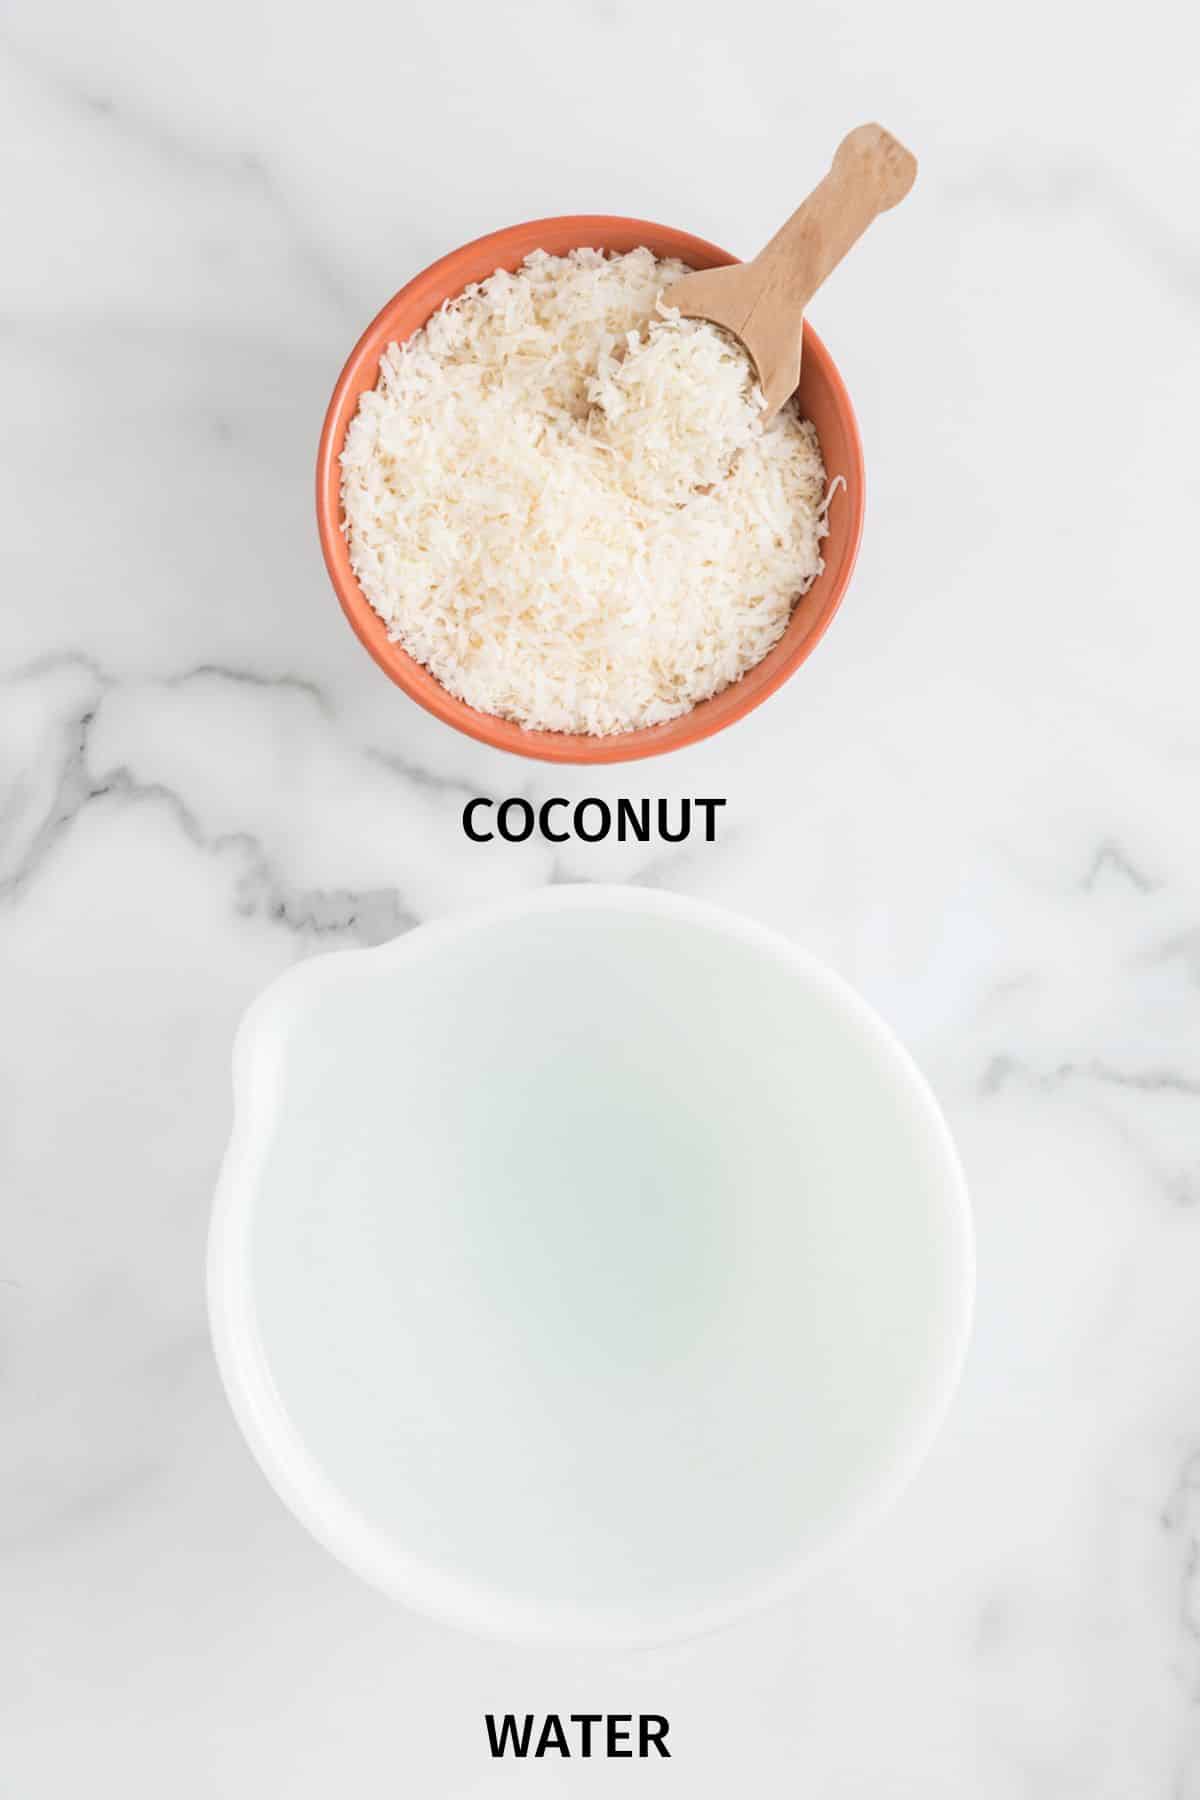 ingredients for making homemade coconut milk.